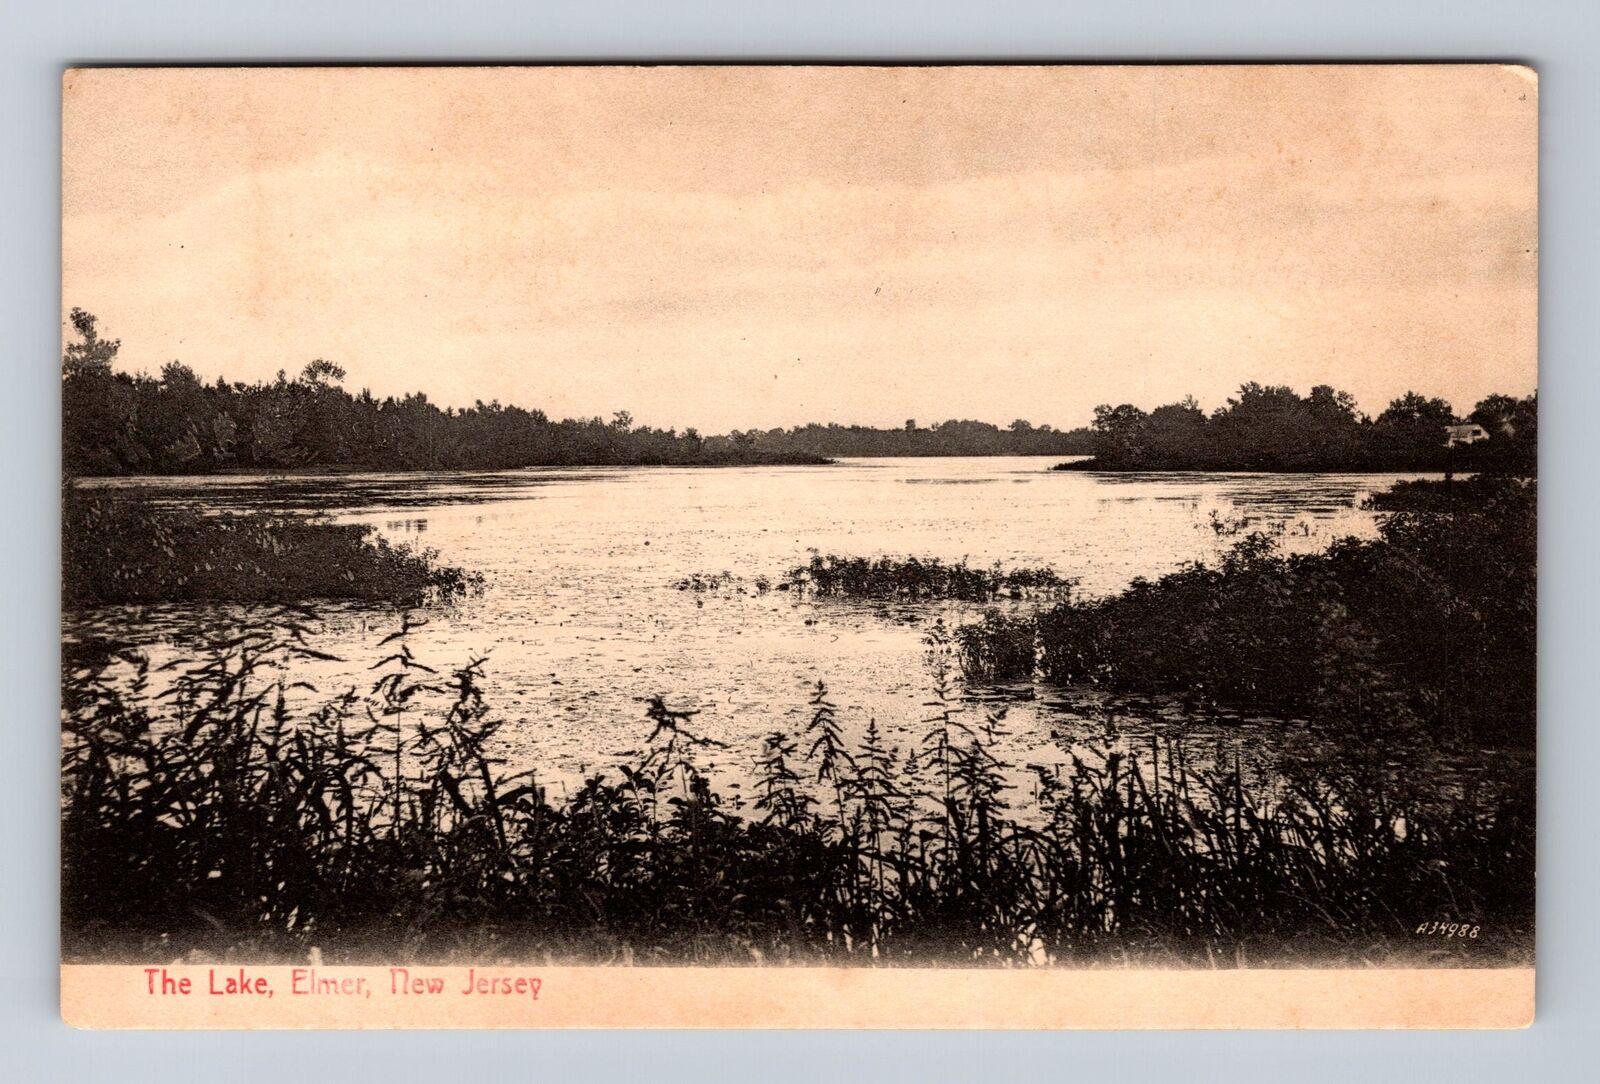 Elmer NJ-New Jersey, Scenic Panoramic View the Lake, Antique Vintage Postcard